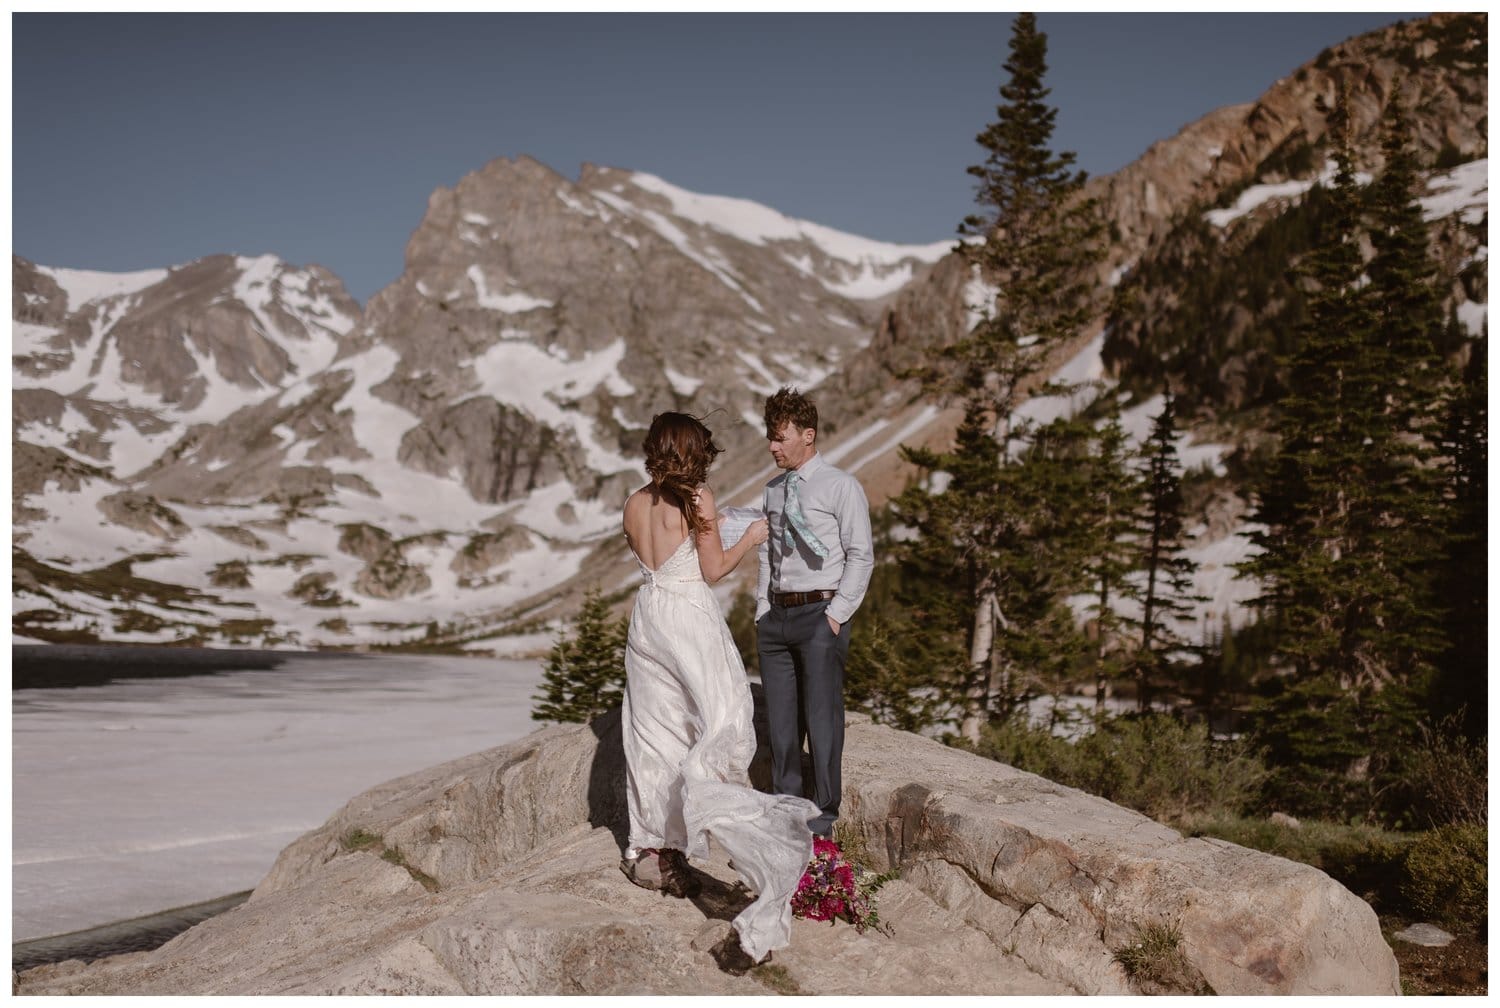 Bride reads her vows in front of an alpine lake, during intimate elopement ceremony at the Indian Peaks in Colorado. There are trees and snow-capped mountains in the background. The bride's dress is flowing in the wind. 